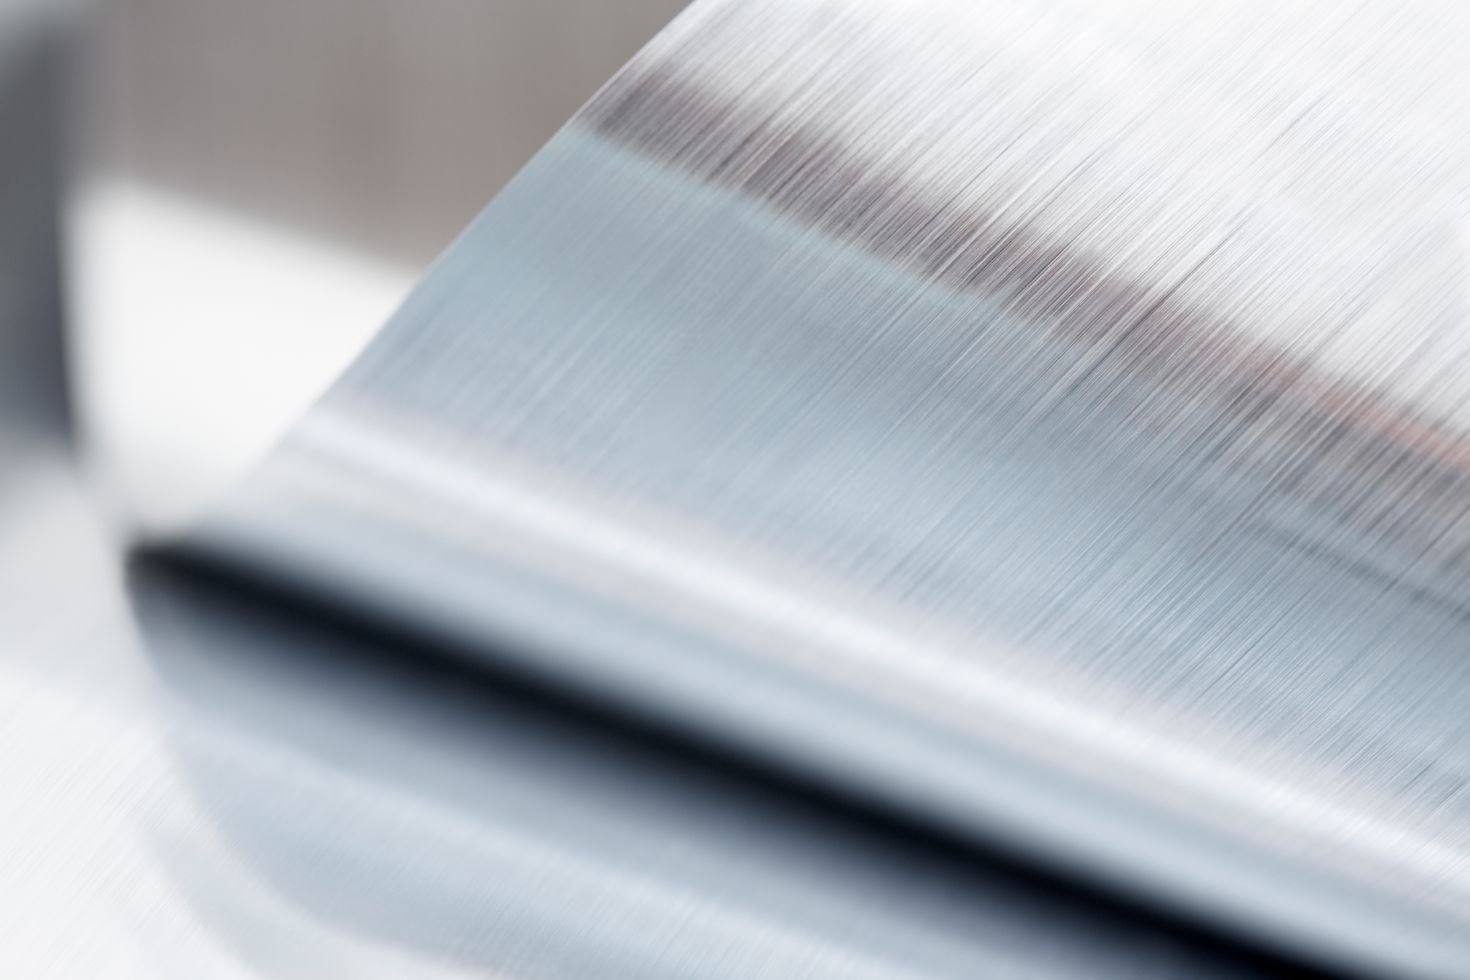 Close-up of a metallic sheet that is rolled up